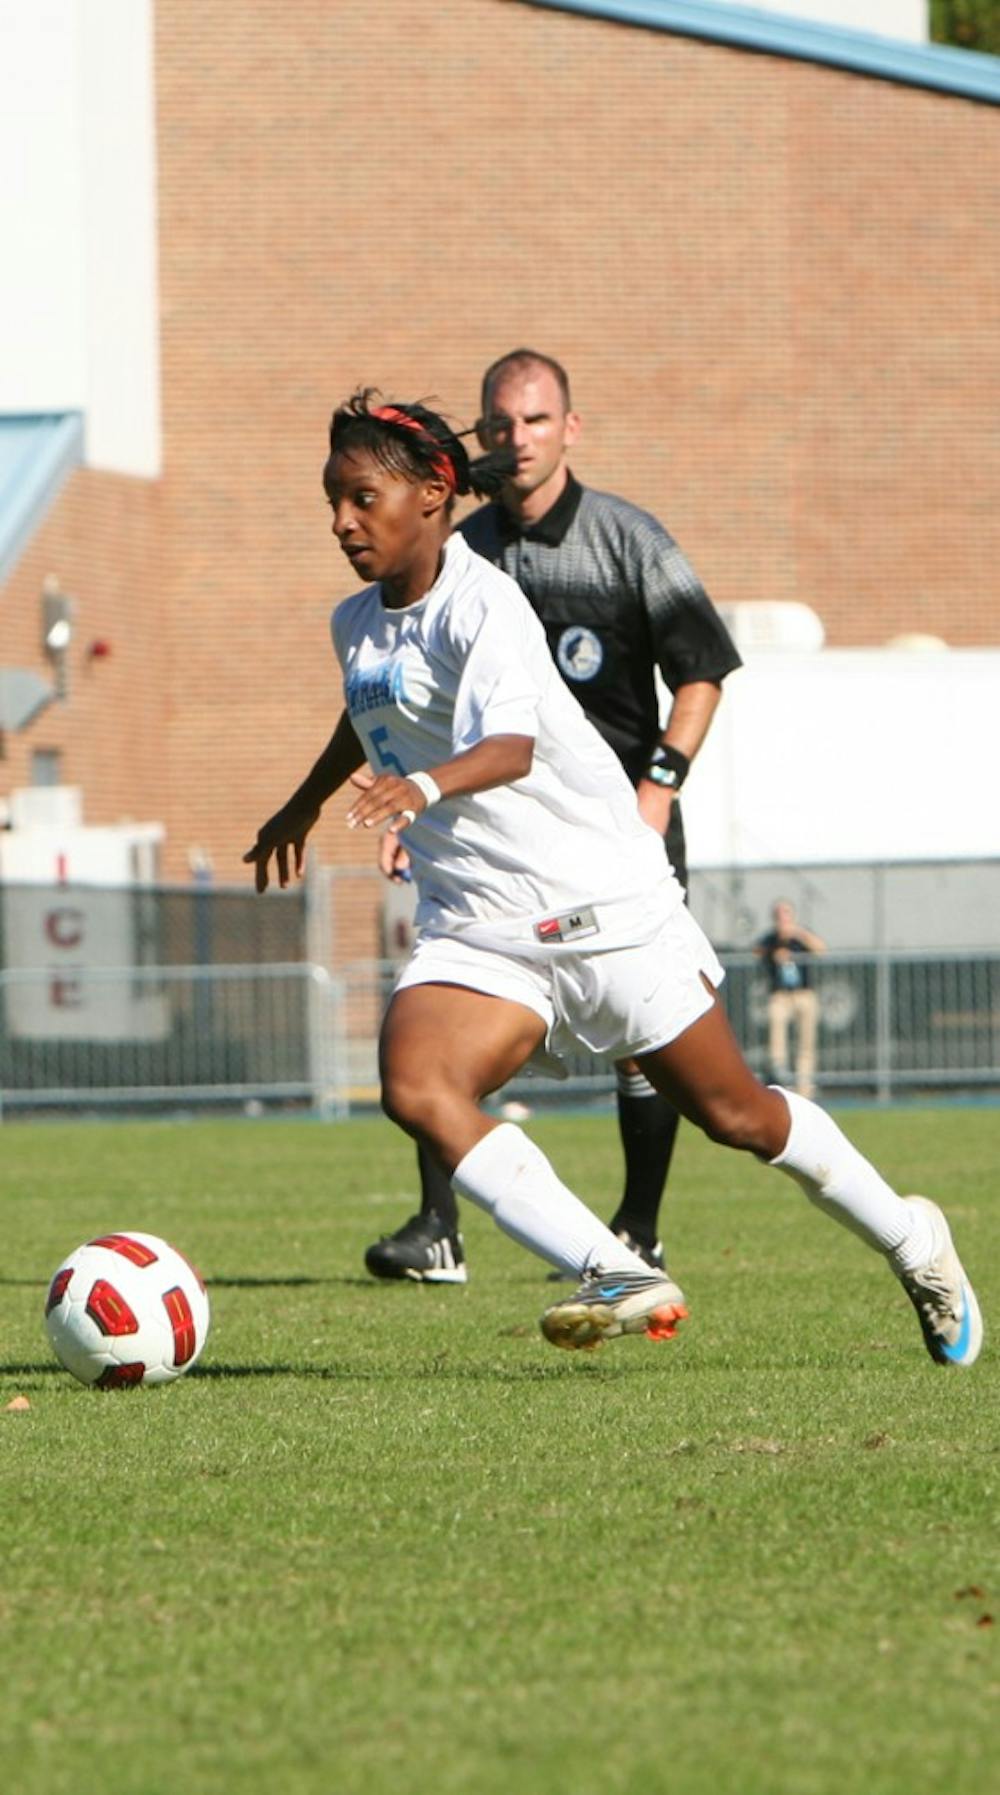 UNC defender Crystal Dunn was named the ACC Defensive Player of the Year on Tuesday. She’s the first freshman to ever receive the award.